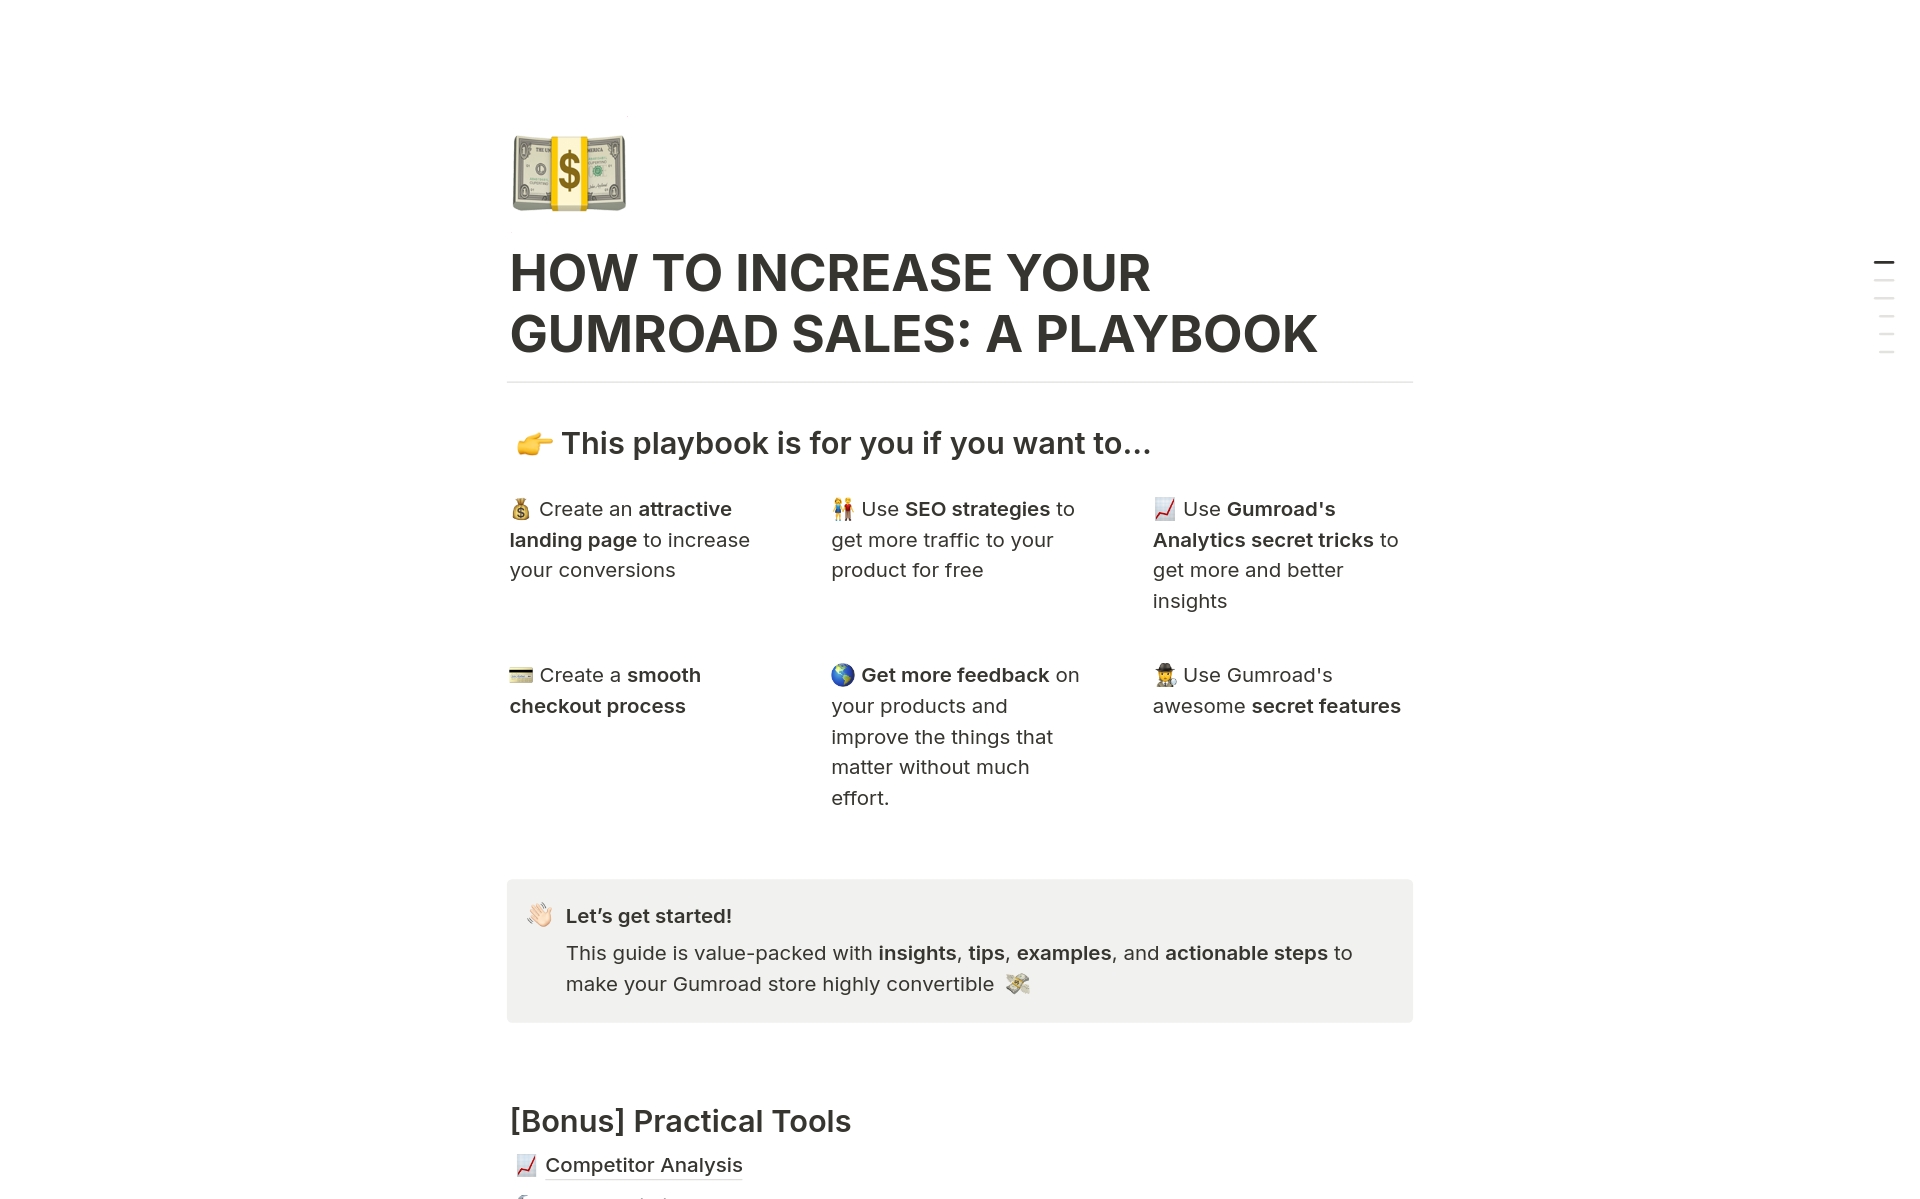 Mallin esikatselu nimelle How to Increase Your Gumroad Sales: A Playbook